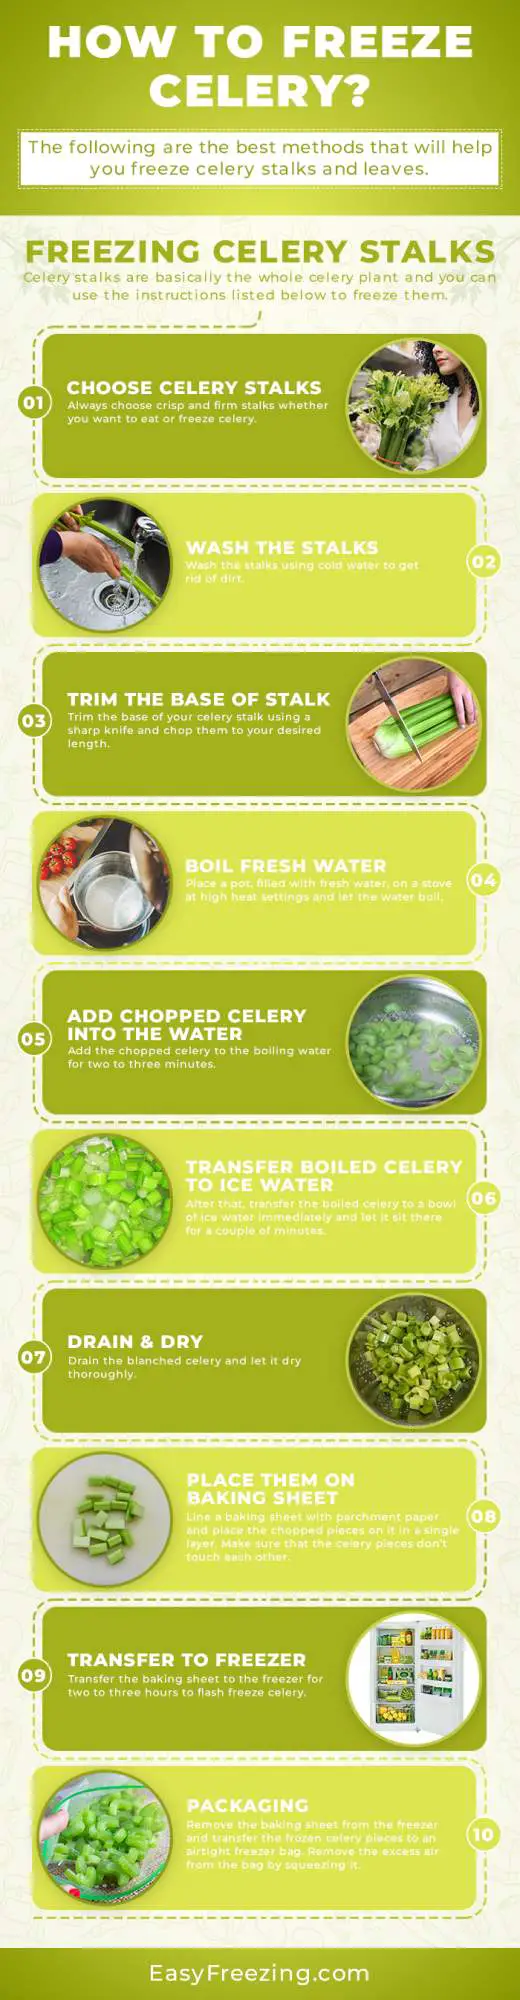 How to freeze celery infographic